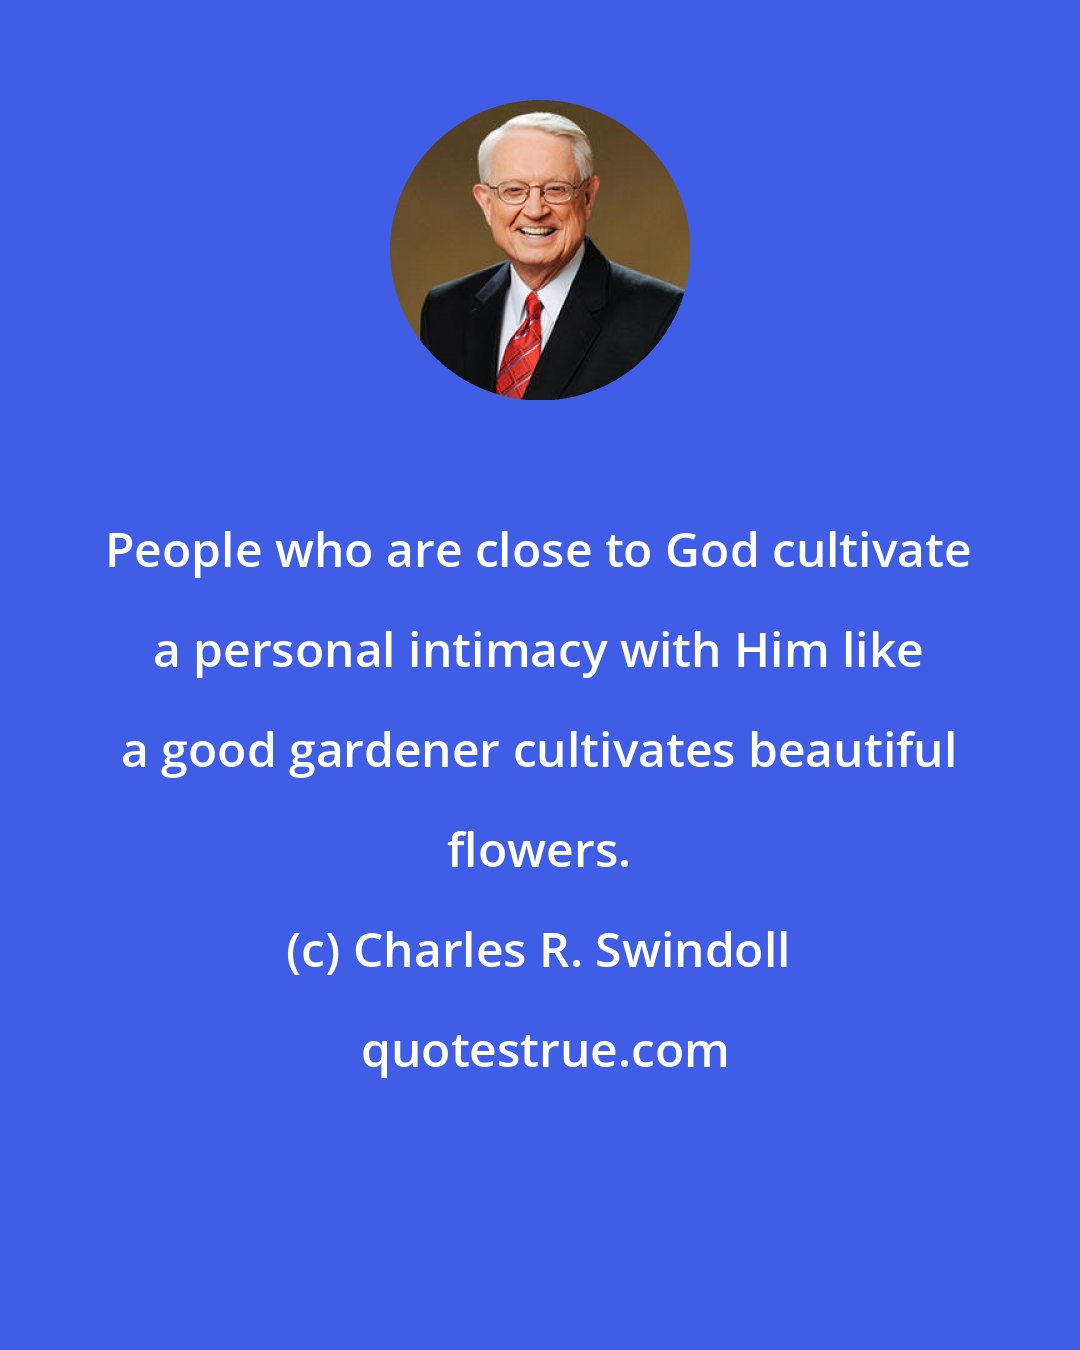 Charles R. Swindoll: People who are close to God cultivate a personal intimacy with Him like a good gardener cultivates beautiful flowers.